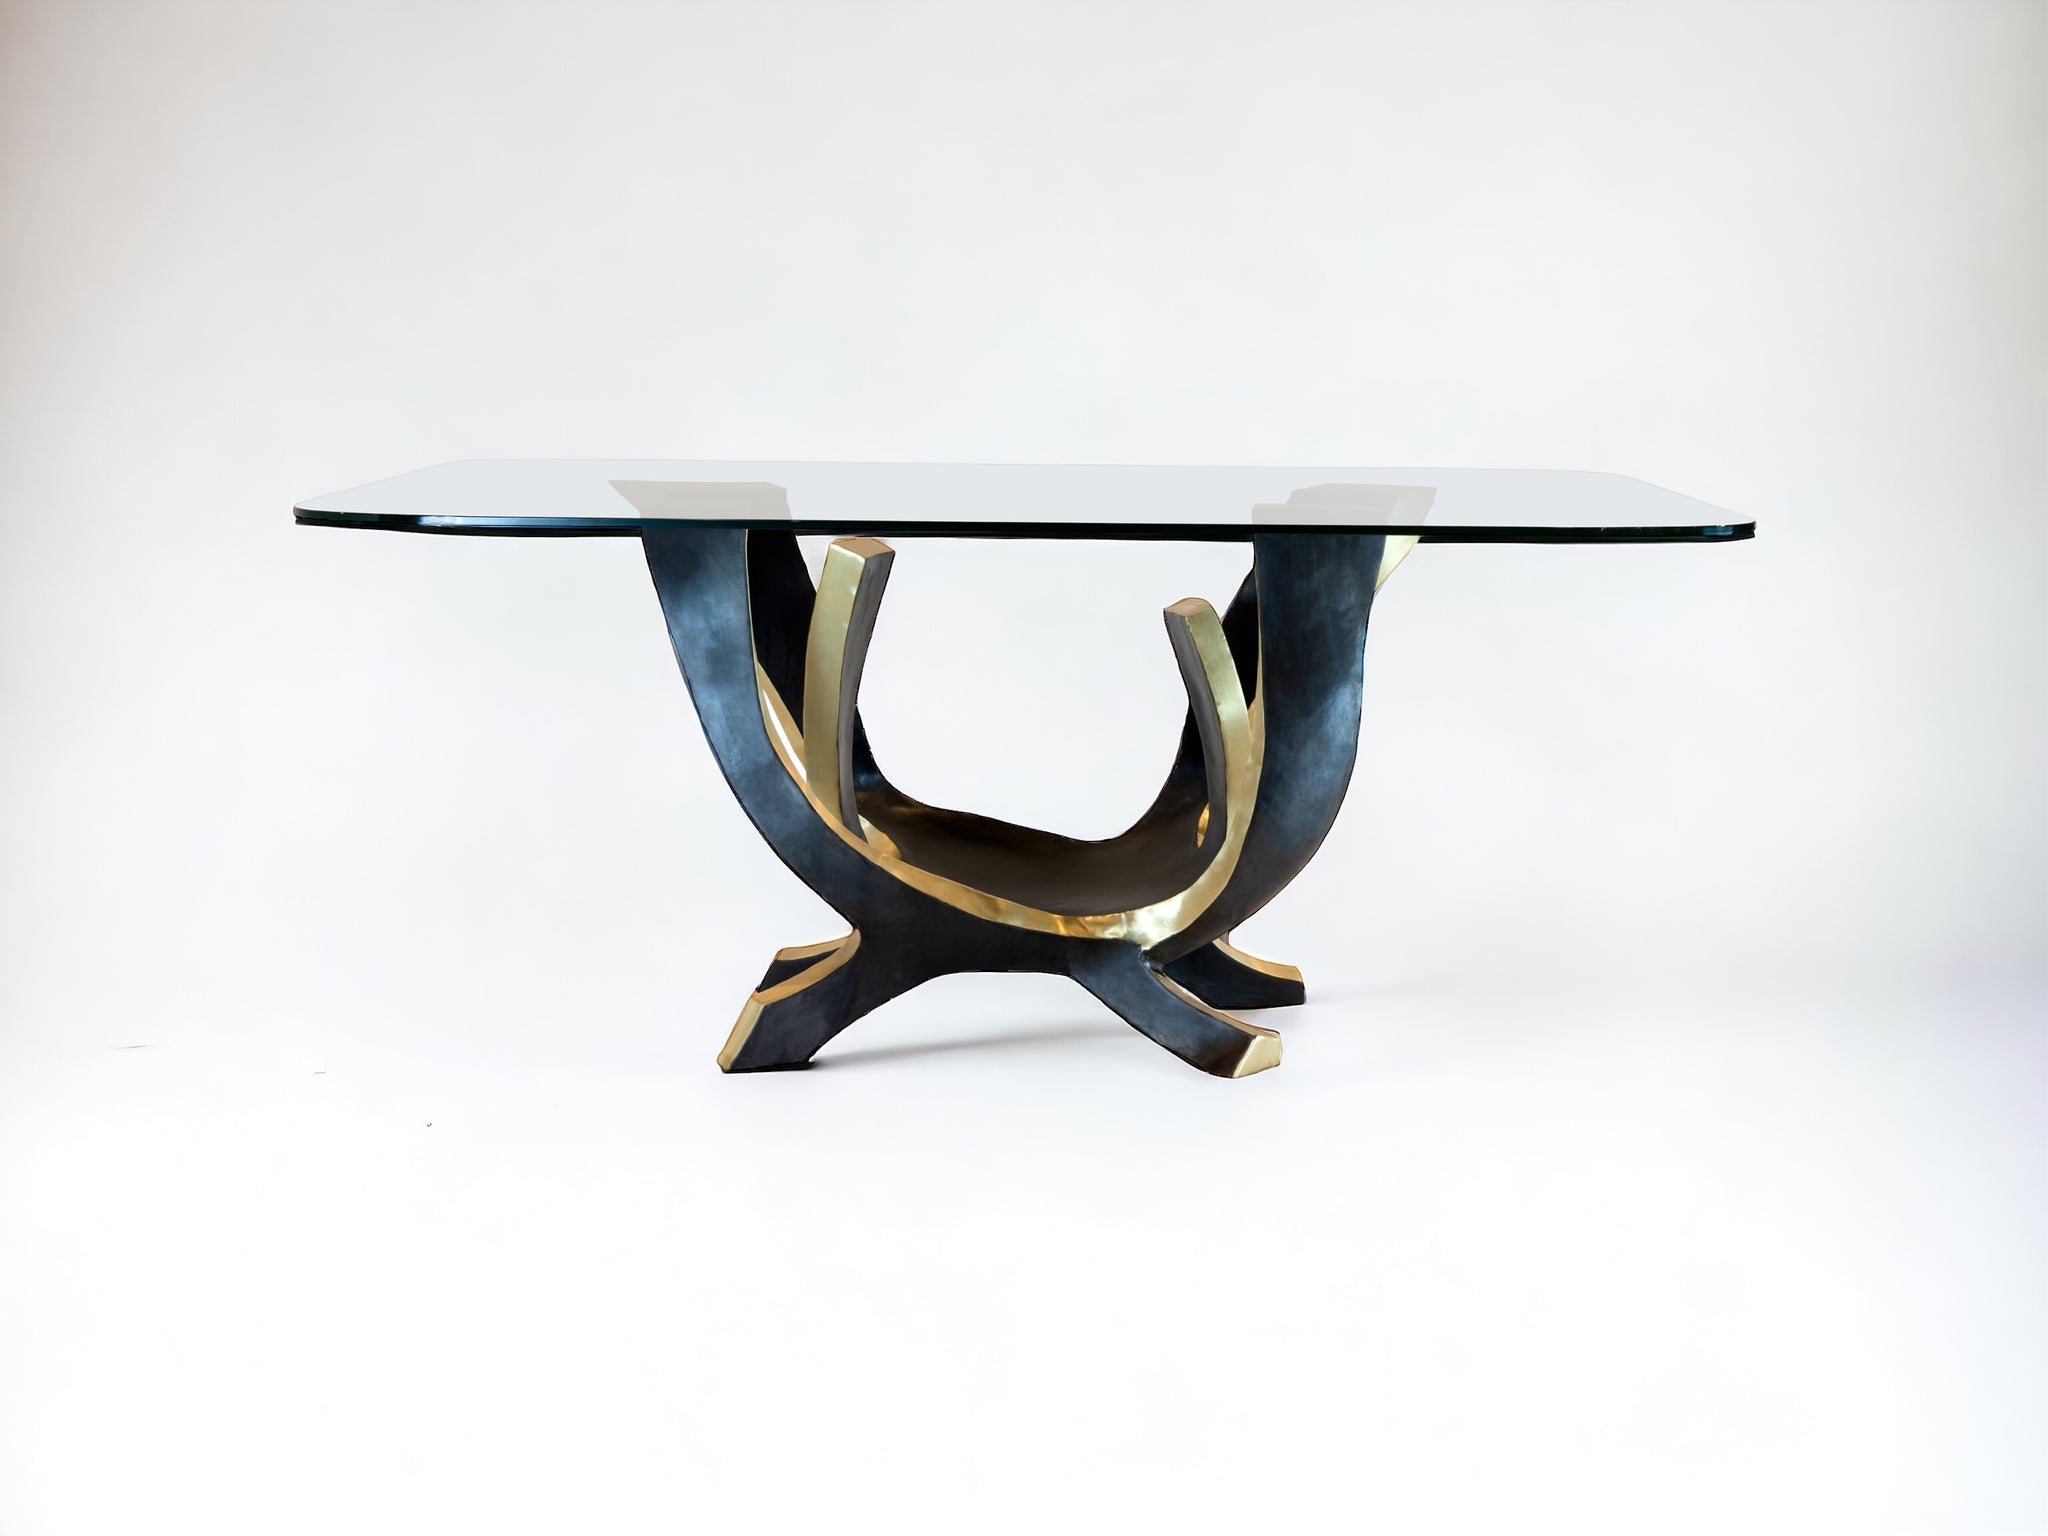 Lia Hand Forged Brass Table